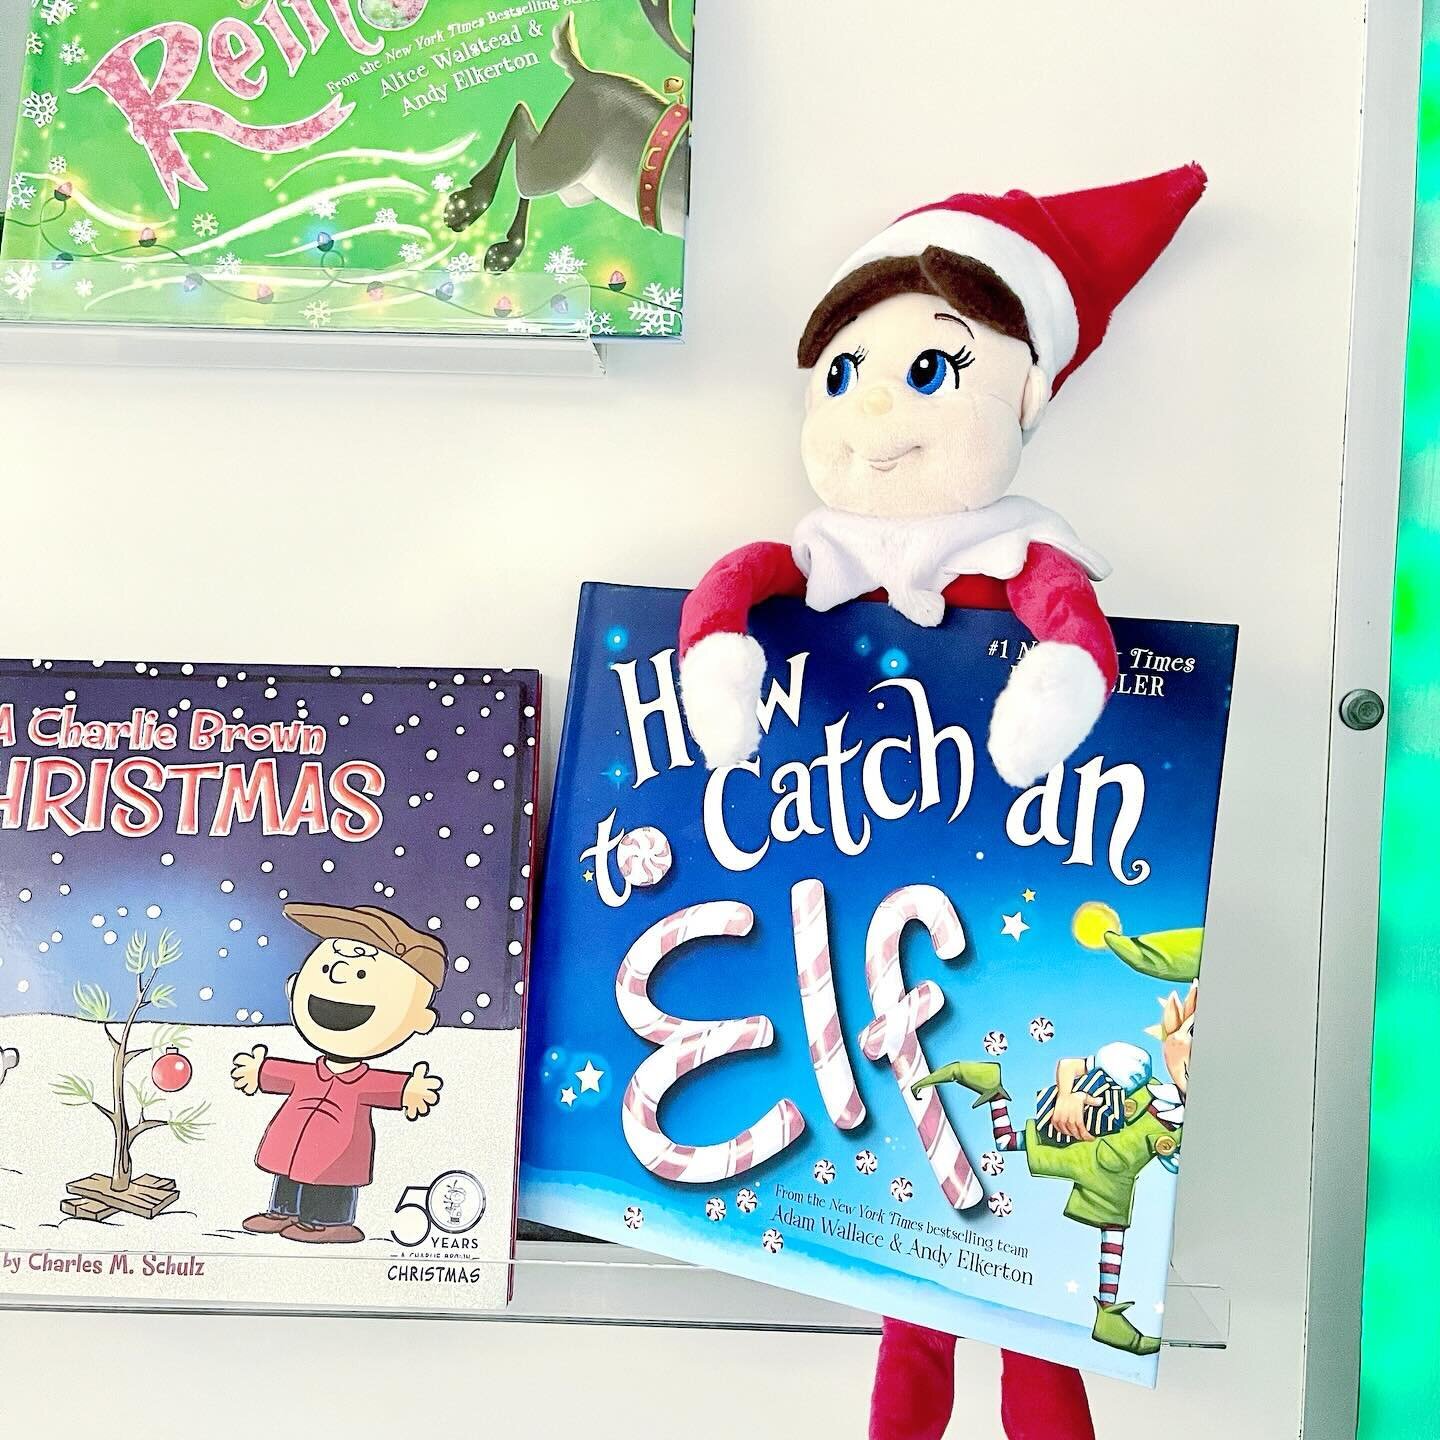 Whoooops! Poor Snowflake actually got caught by &ldquo;How to Catch an Elf&rdquo; book. Guess the book worked! lol! #happyeducating #elfontheshelf #elfintheclassroom #teachersoninstagram